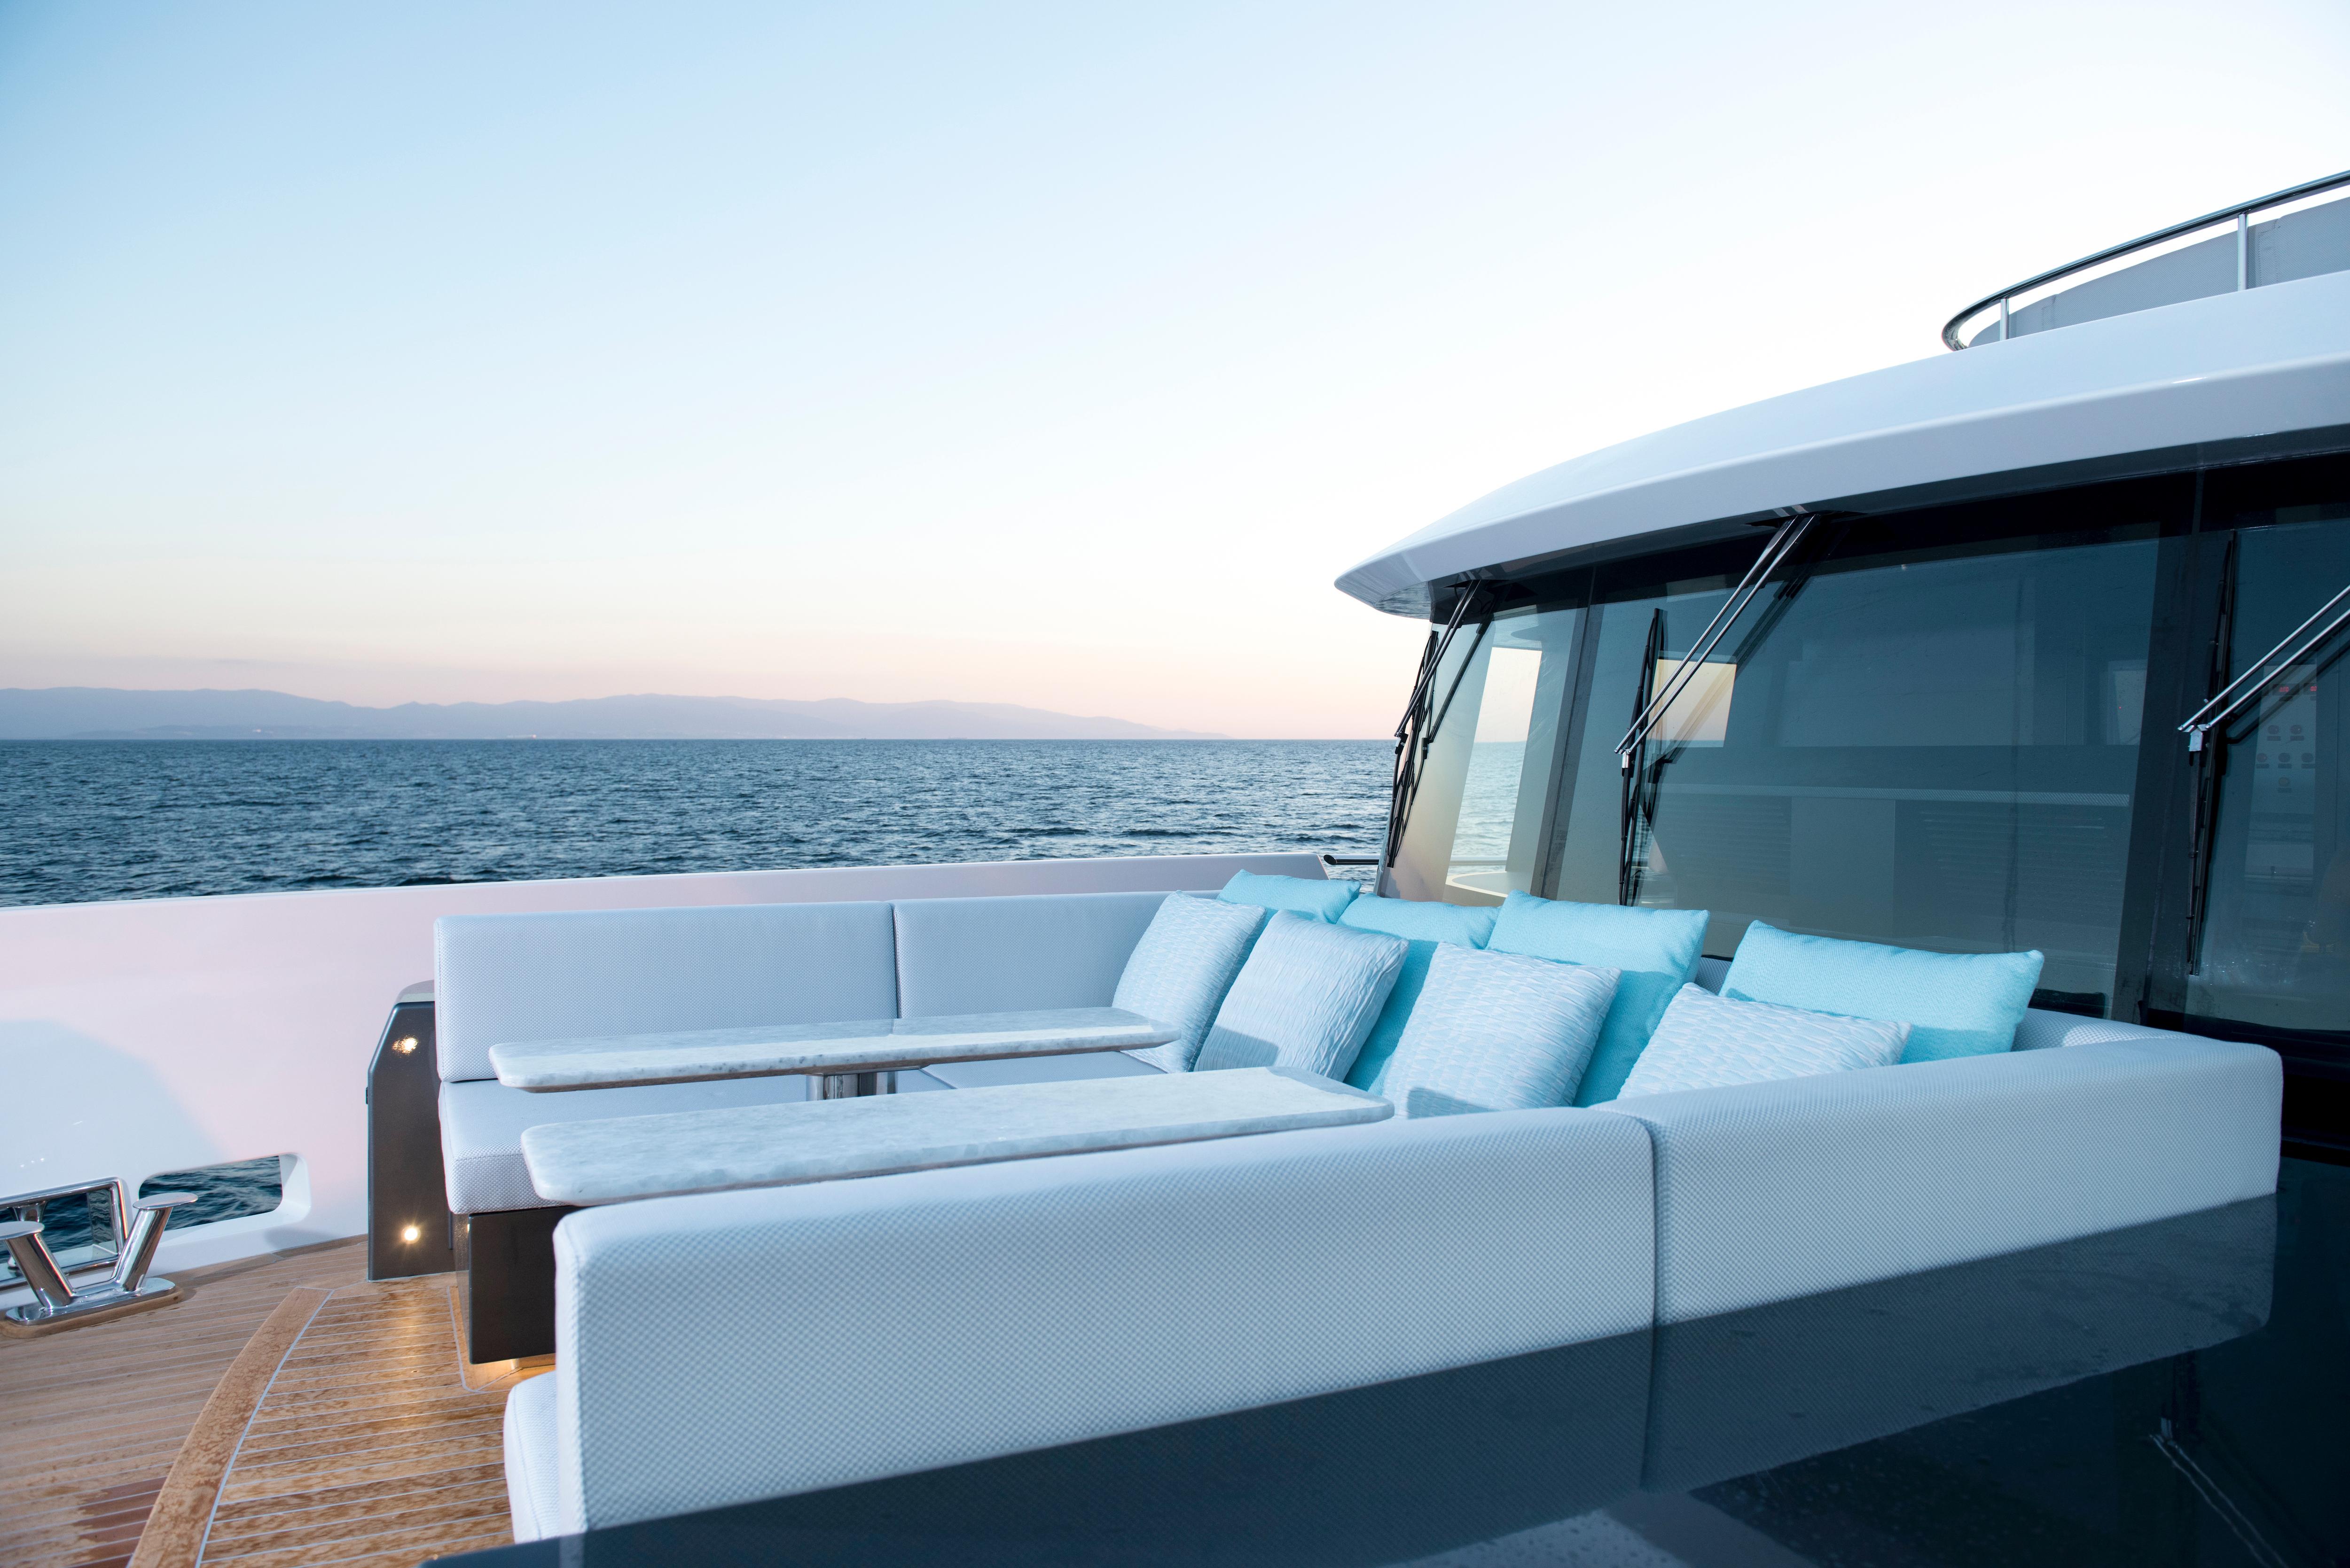 Foredeck lounge seating